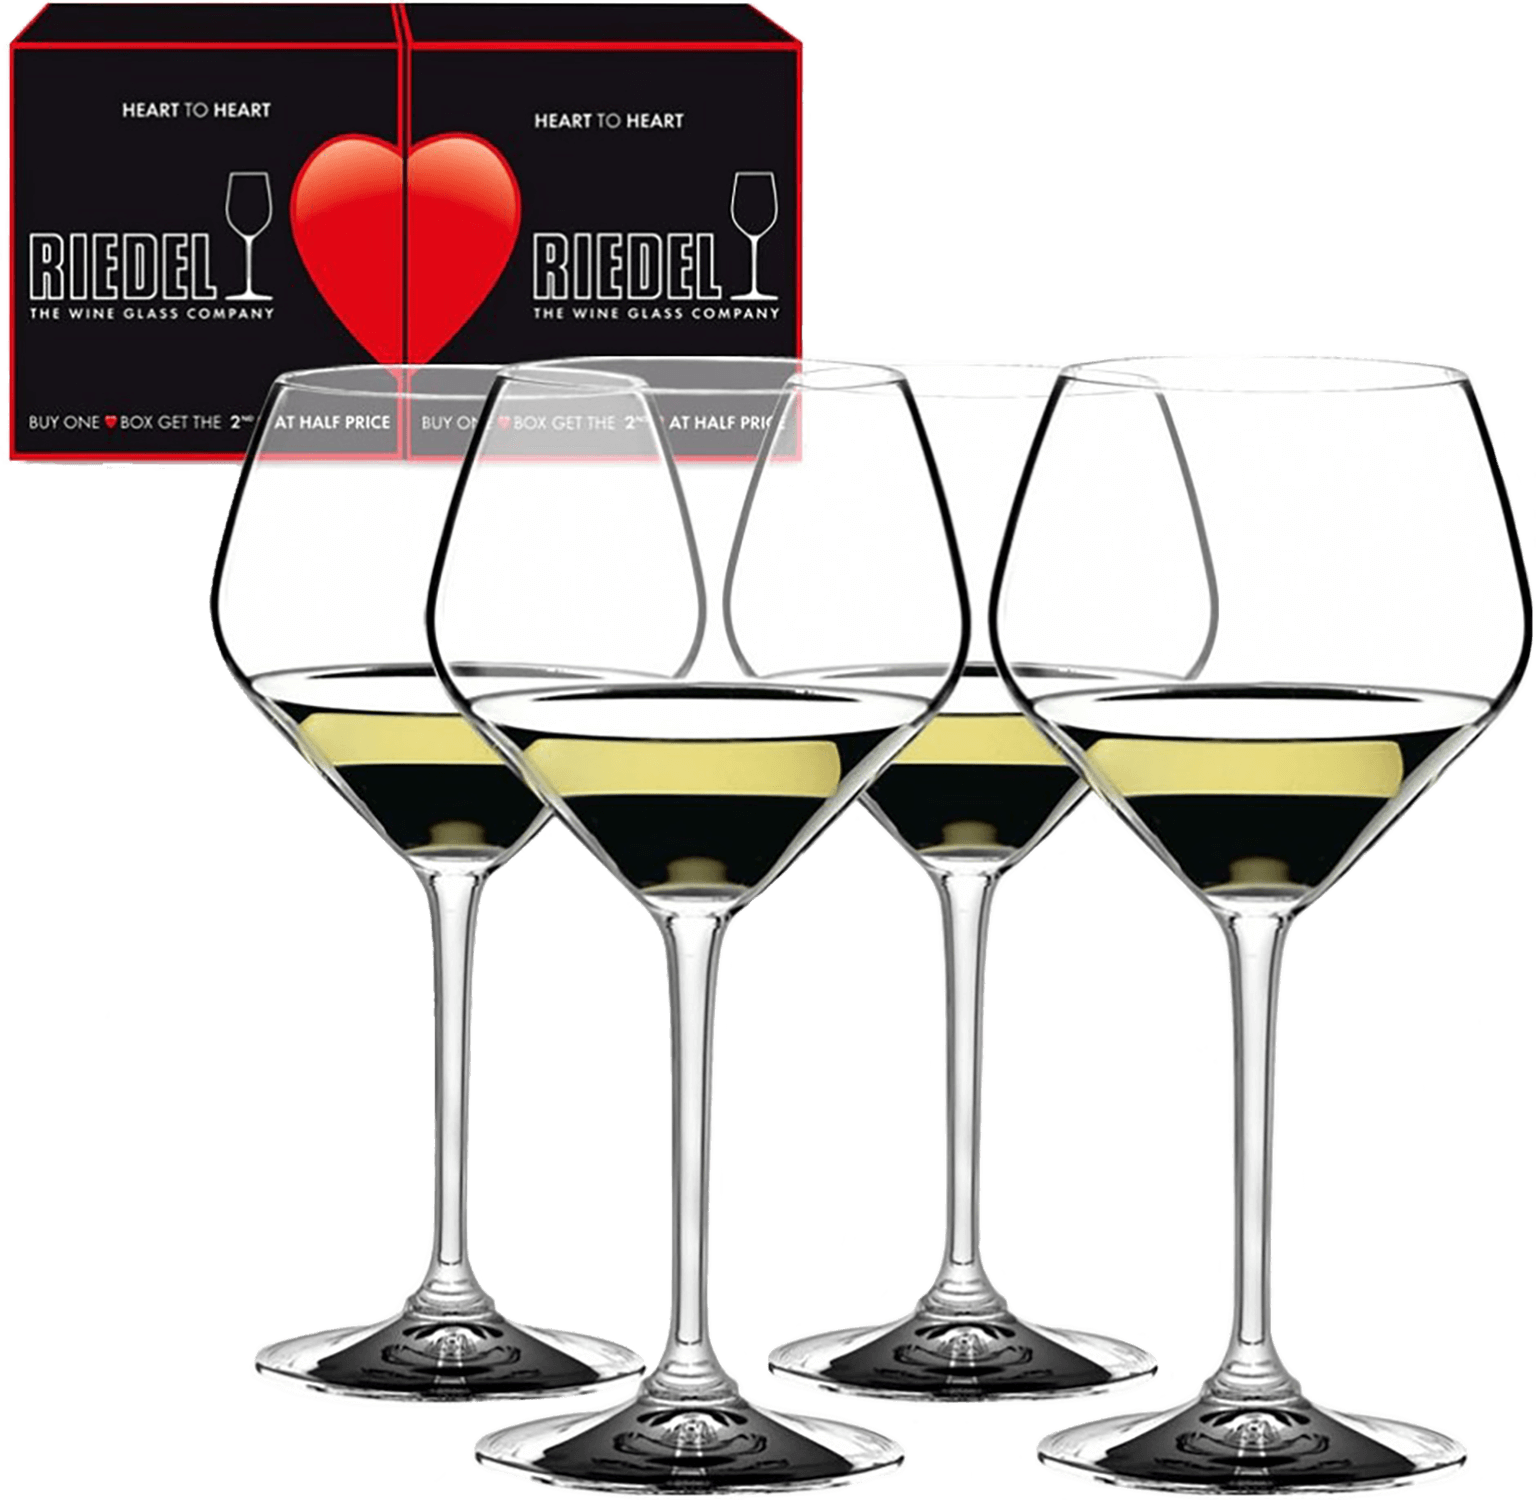 Riedel Heart to Heart Chardonnay (4 glasses set) riedel veritas oaked chardonnay 2 glasses set